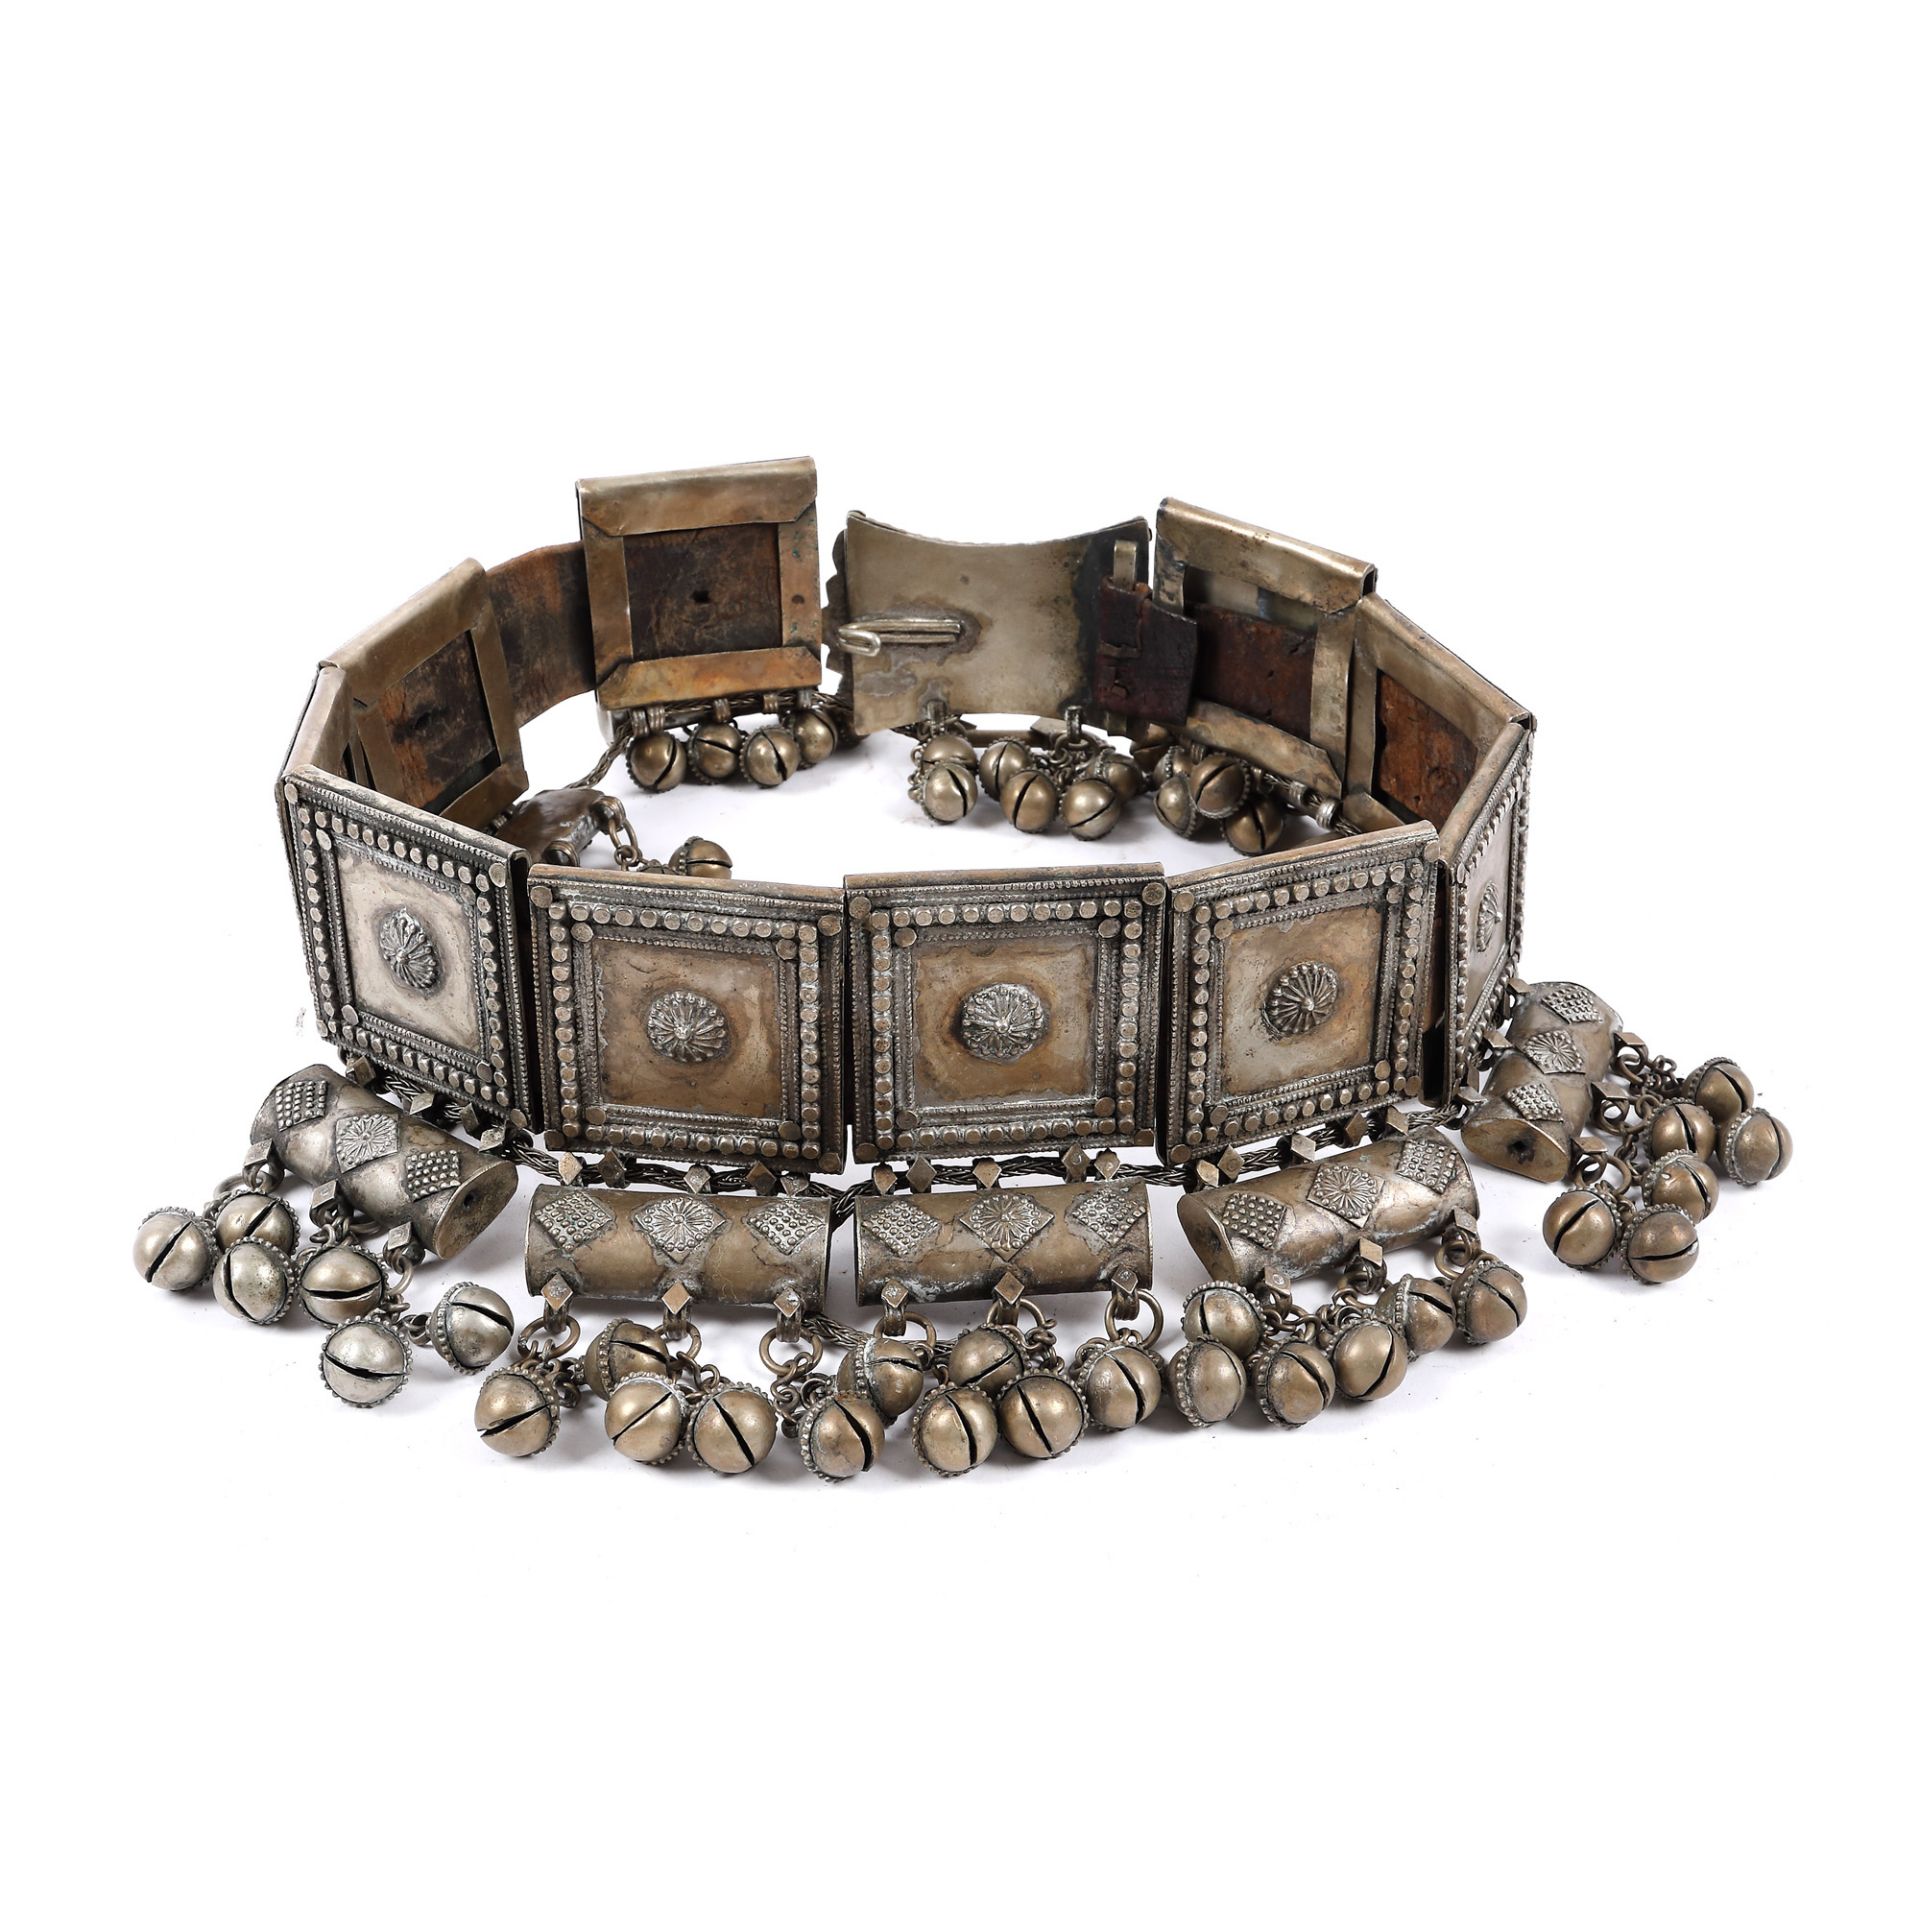 Indo-Persian belt, with oriental motifs, start of the 20th century - Image 3 of 3